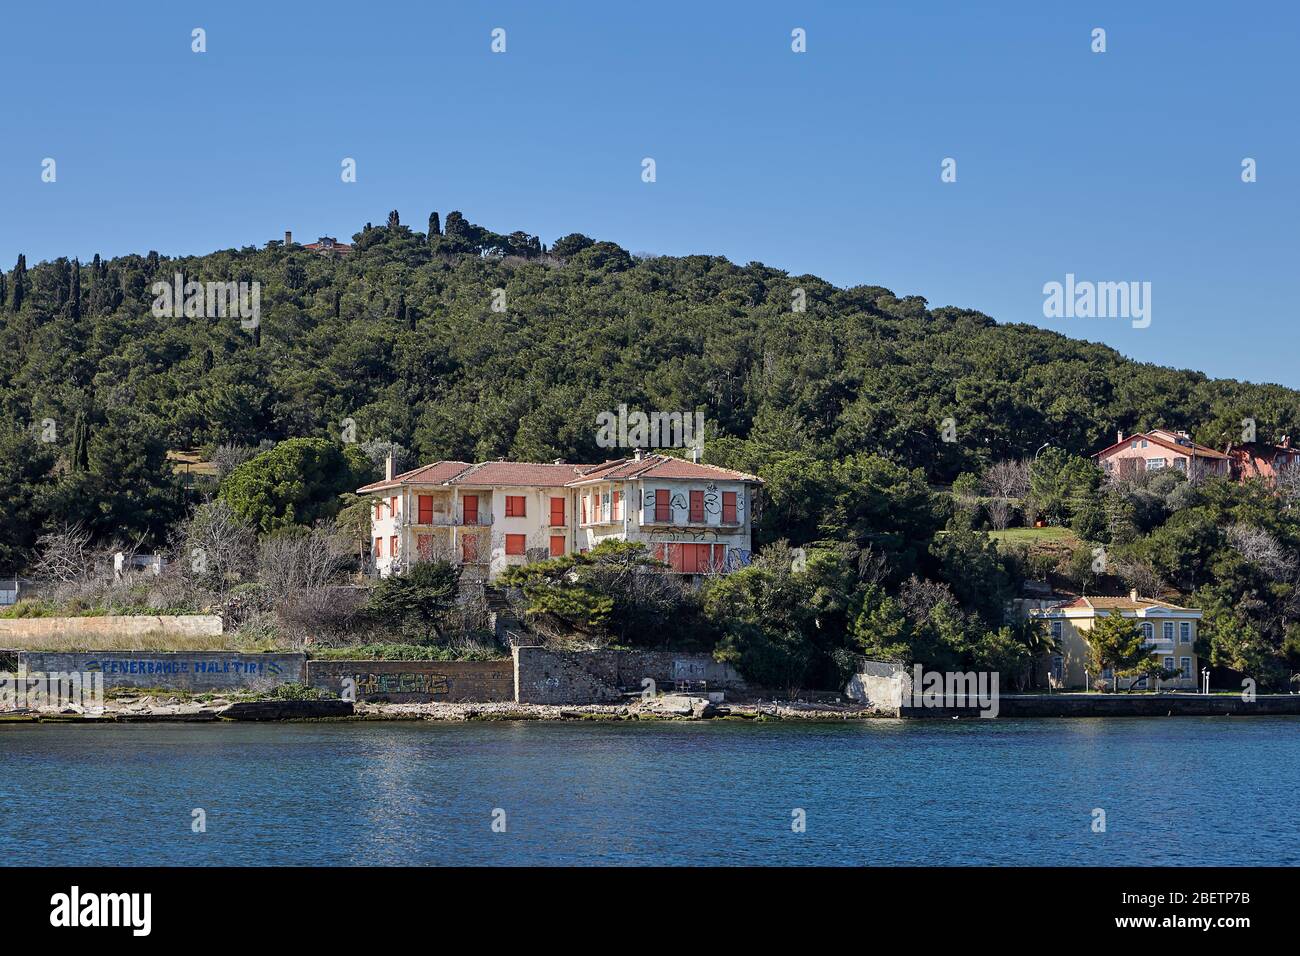 Istanbul, Turkey - February 13, 2020: An abandoned summer cottage with boarded up windows stands on a hillside, on the shores of the Sea of Marmara on Stock Photo